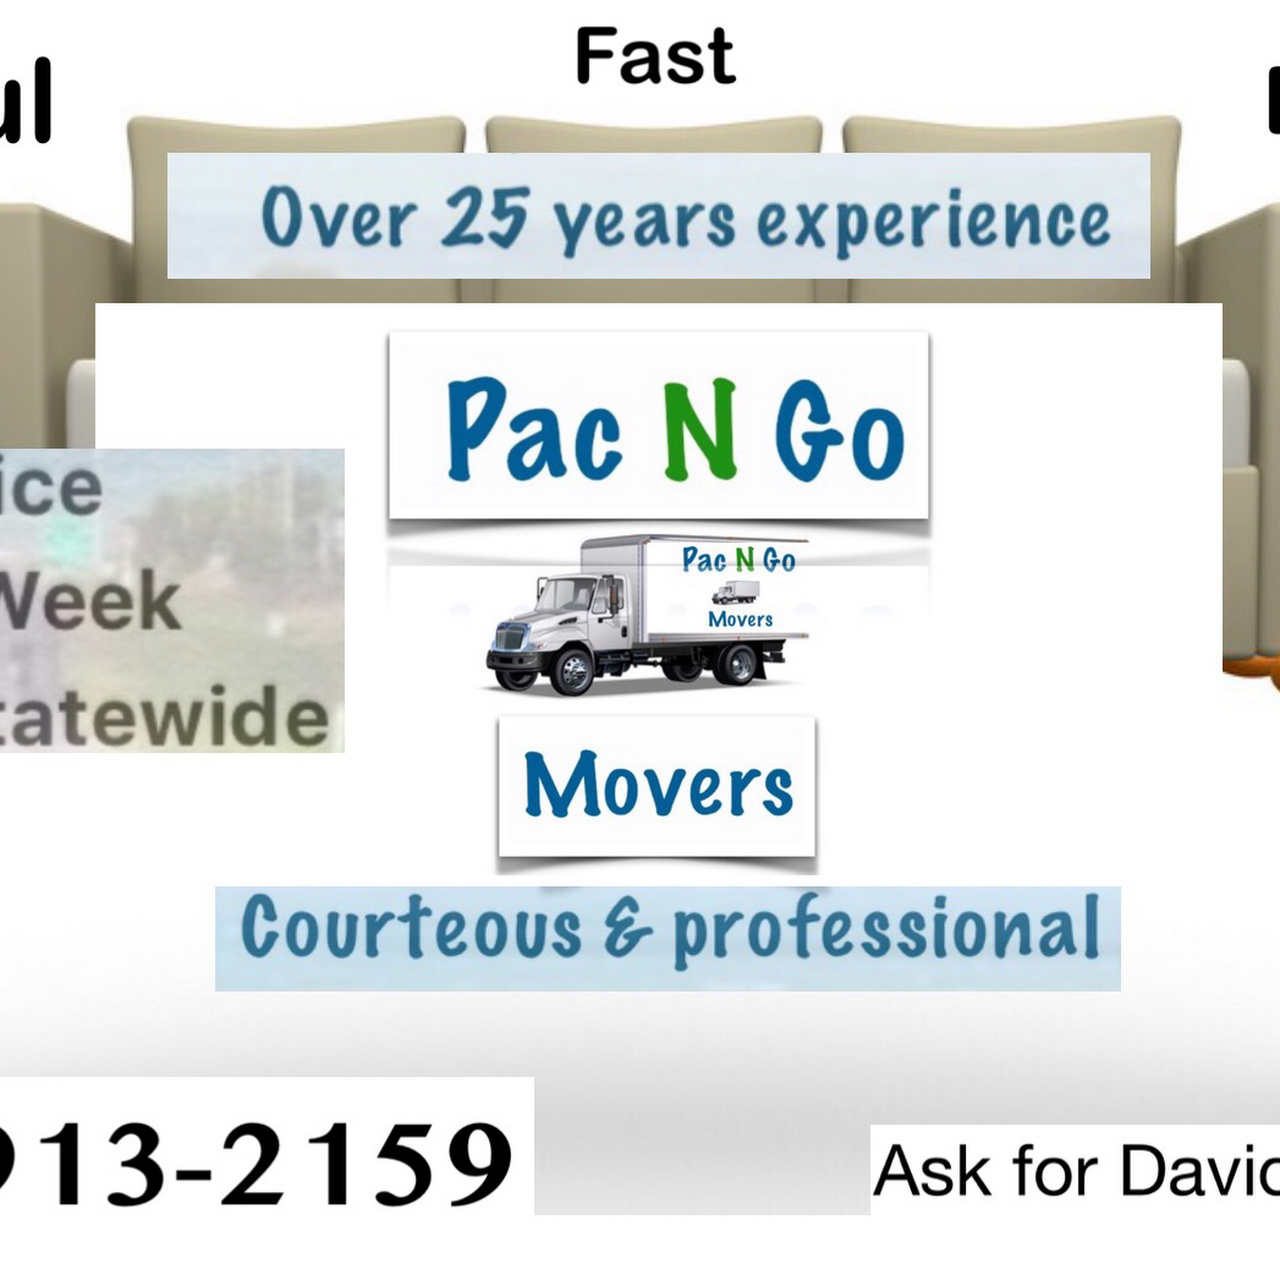 Pac N Go Movers logo